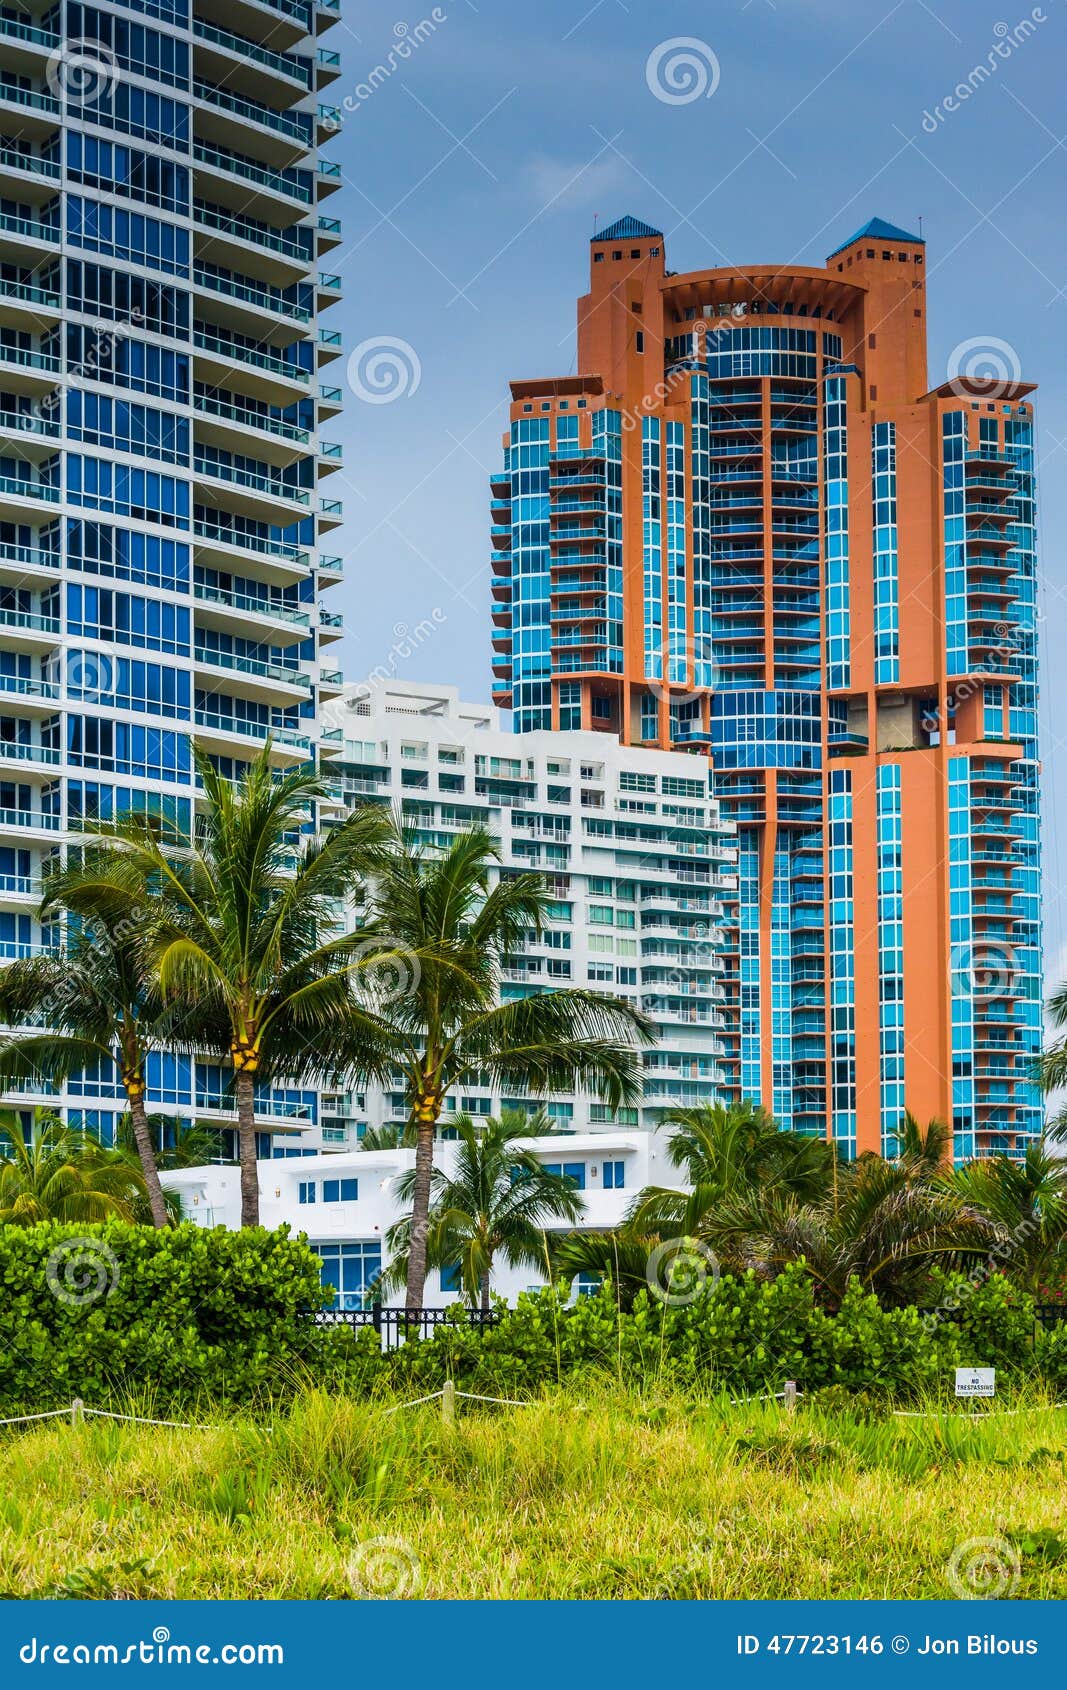 palm trees and highrises in south beach, miami, florida.